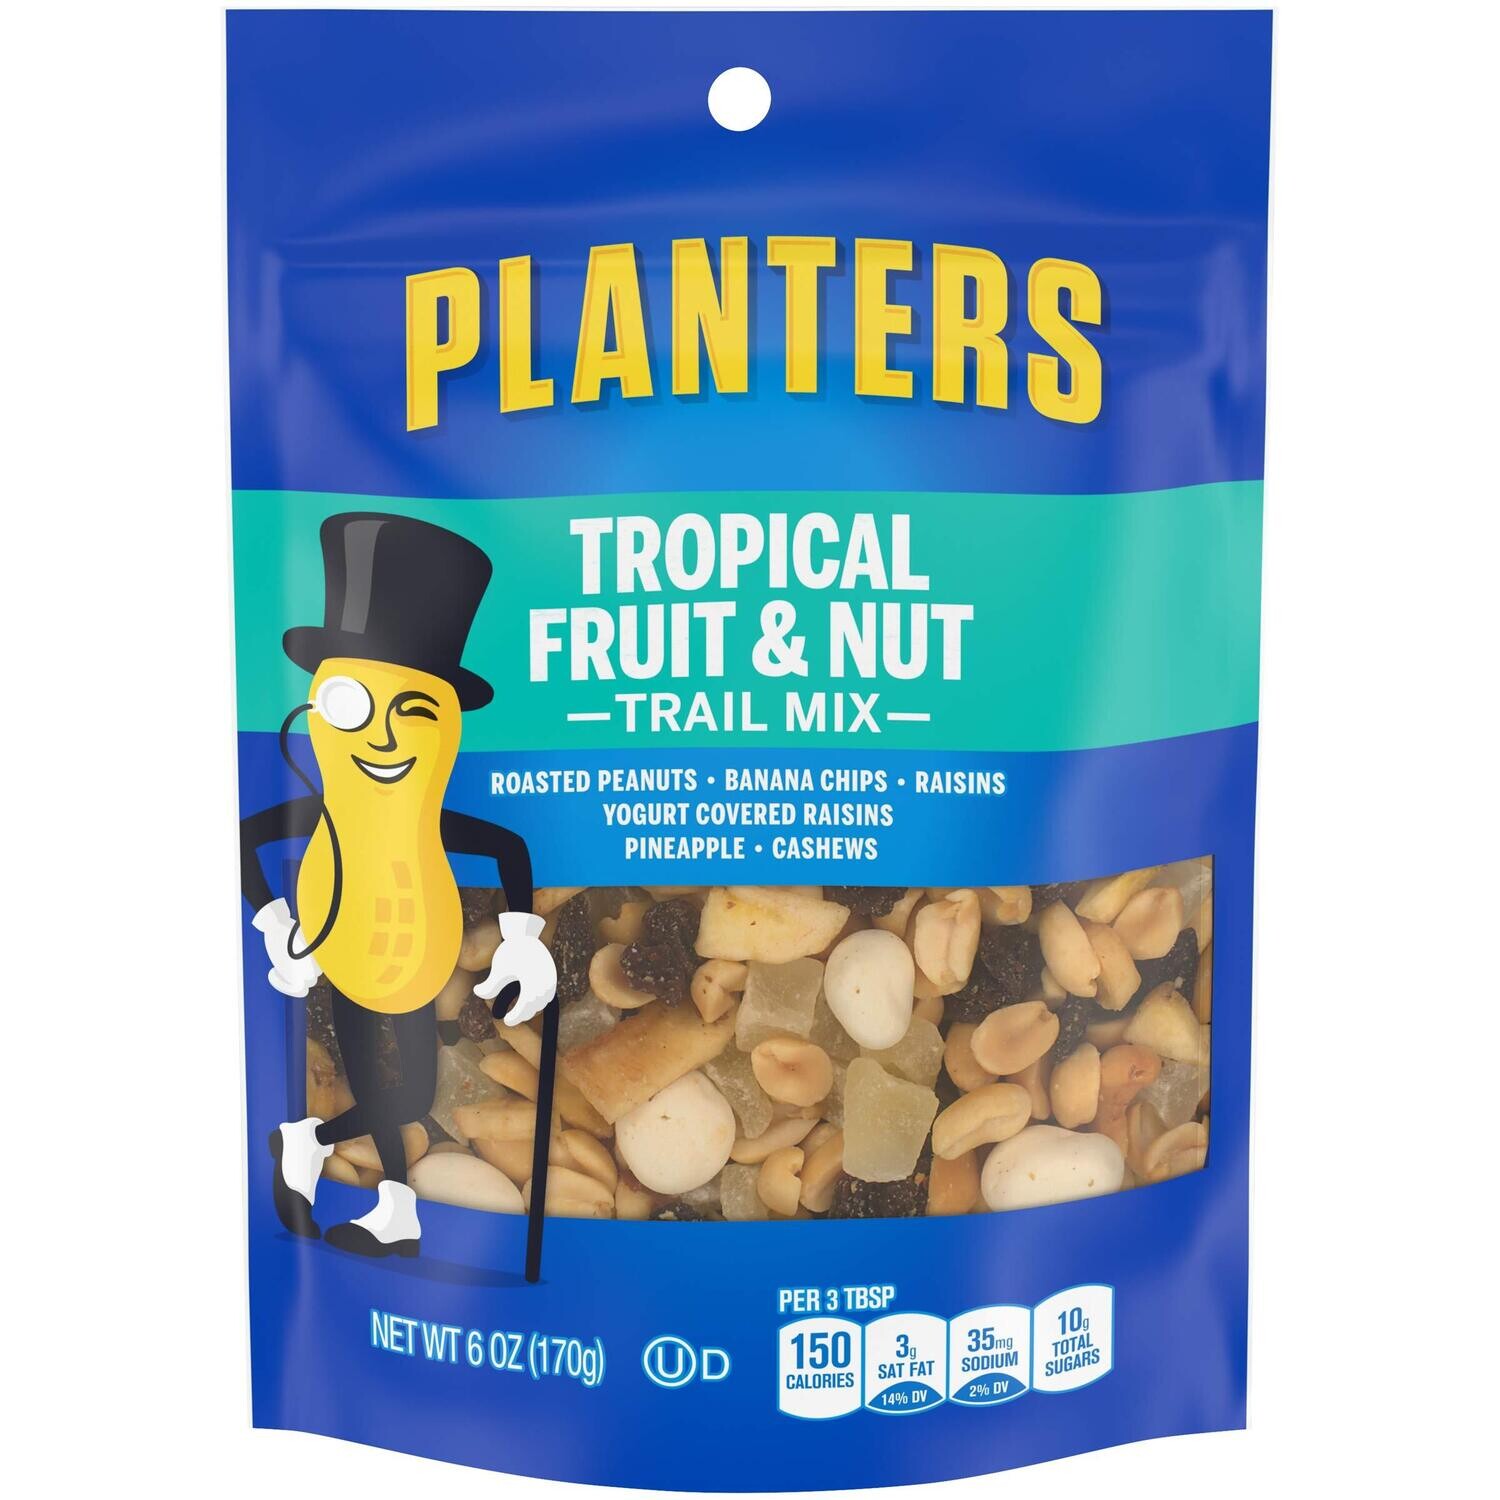 *Hiker PreOrder* Planters: Tropical Fruit and Nut Mix 6 oz.